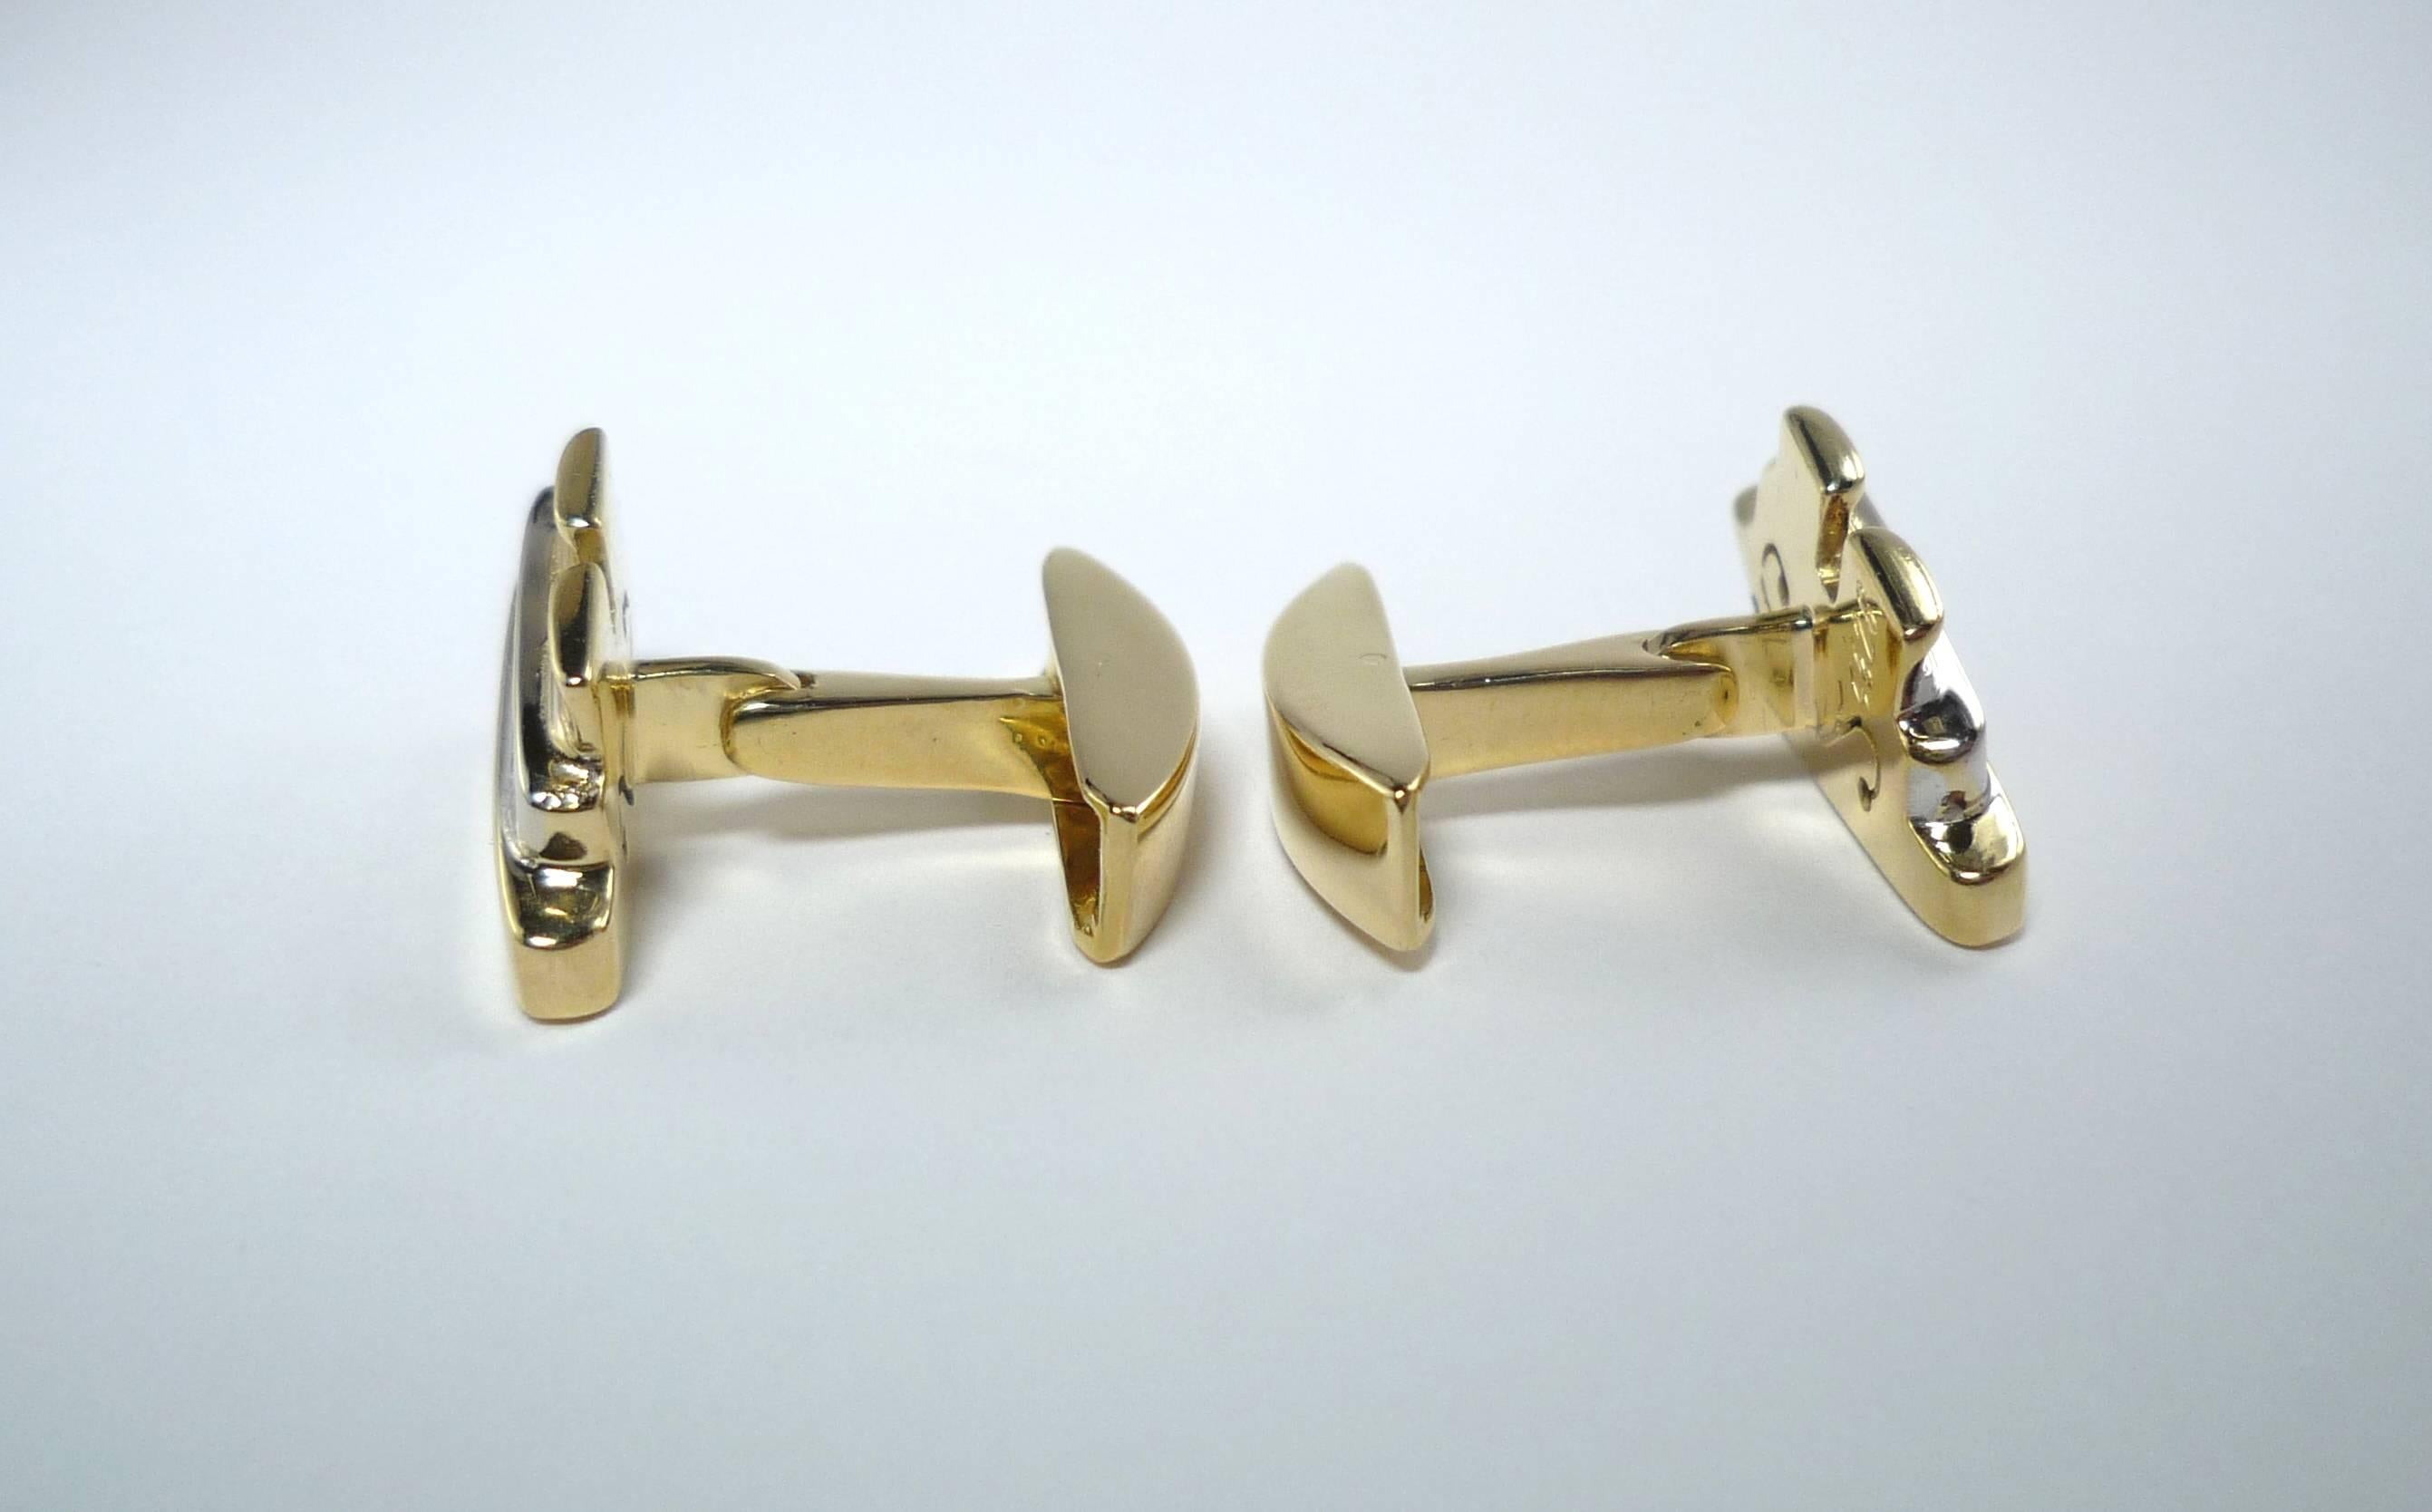 A Pair of Cufflinks in the design of a Cruise Ship with movable hinges.
The 6 Diamonds mounted in 750/-Yellow Gold and
750/-White Gold. The back can be folded down. 
Signed WEMPE